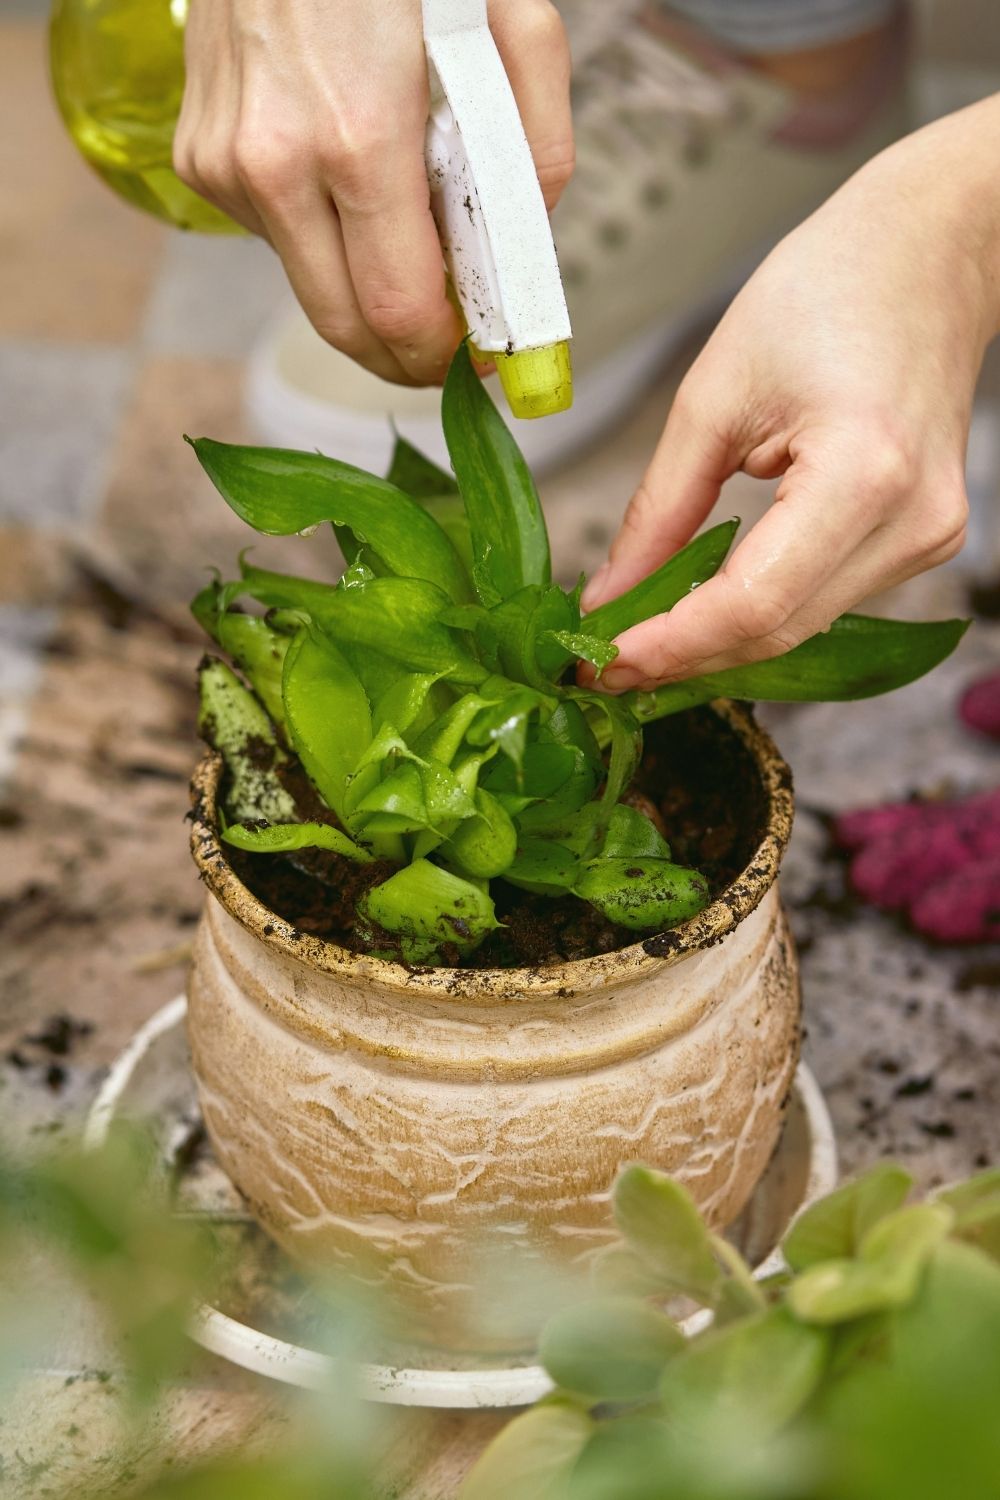 Spraying a vinegar-water solution on your plants is another way to stop cats from eating them